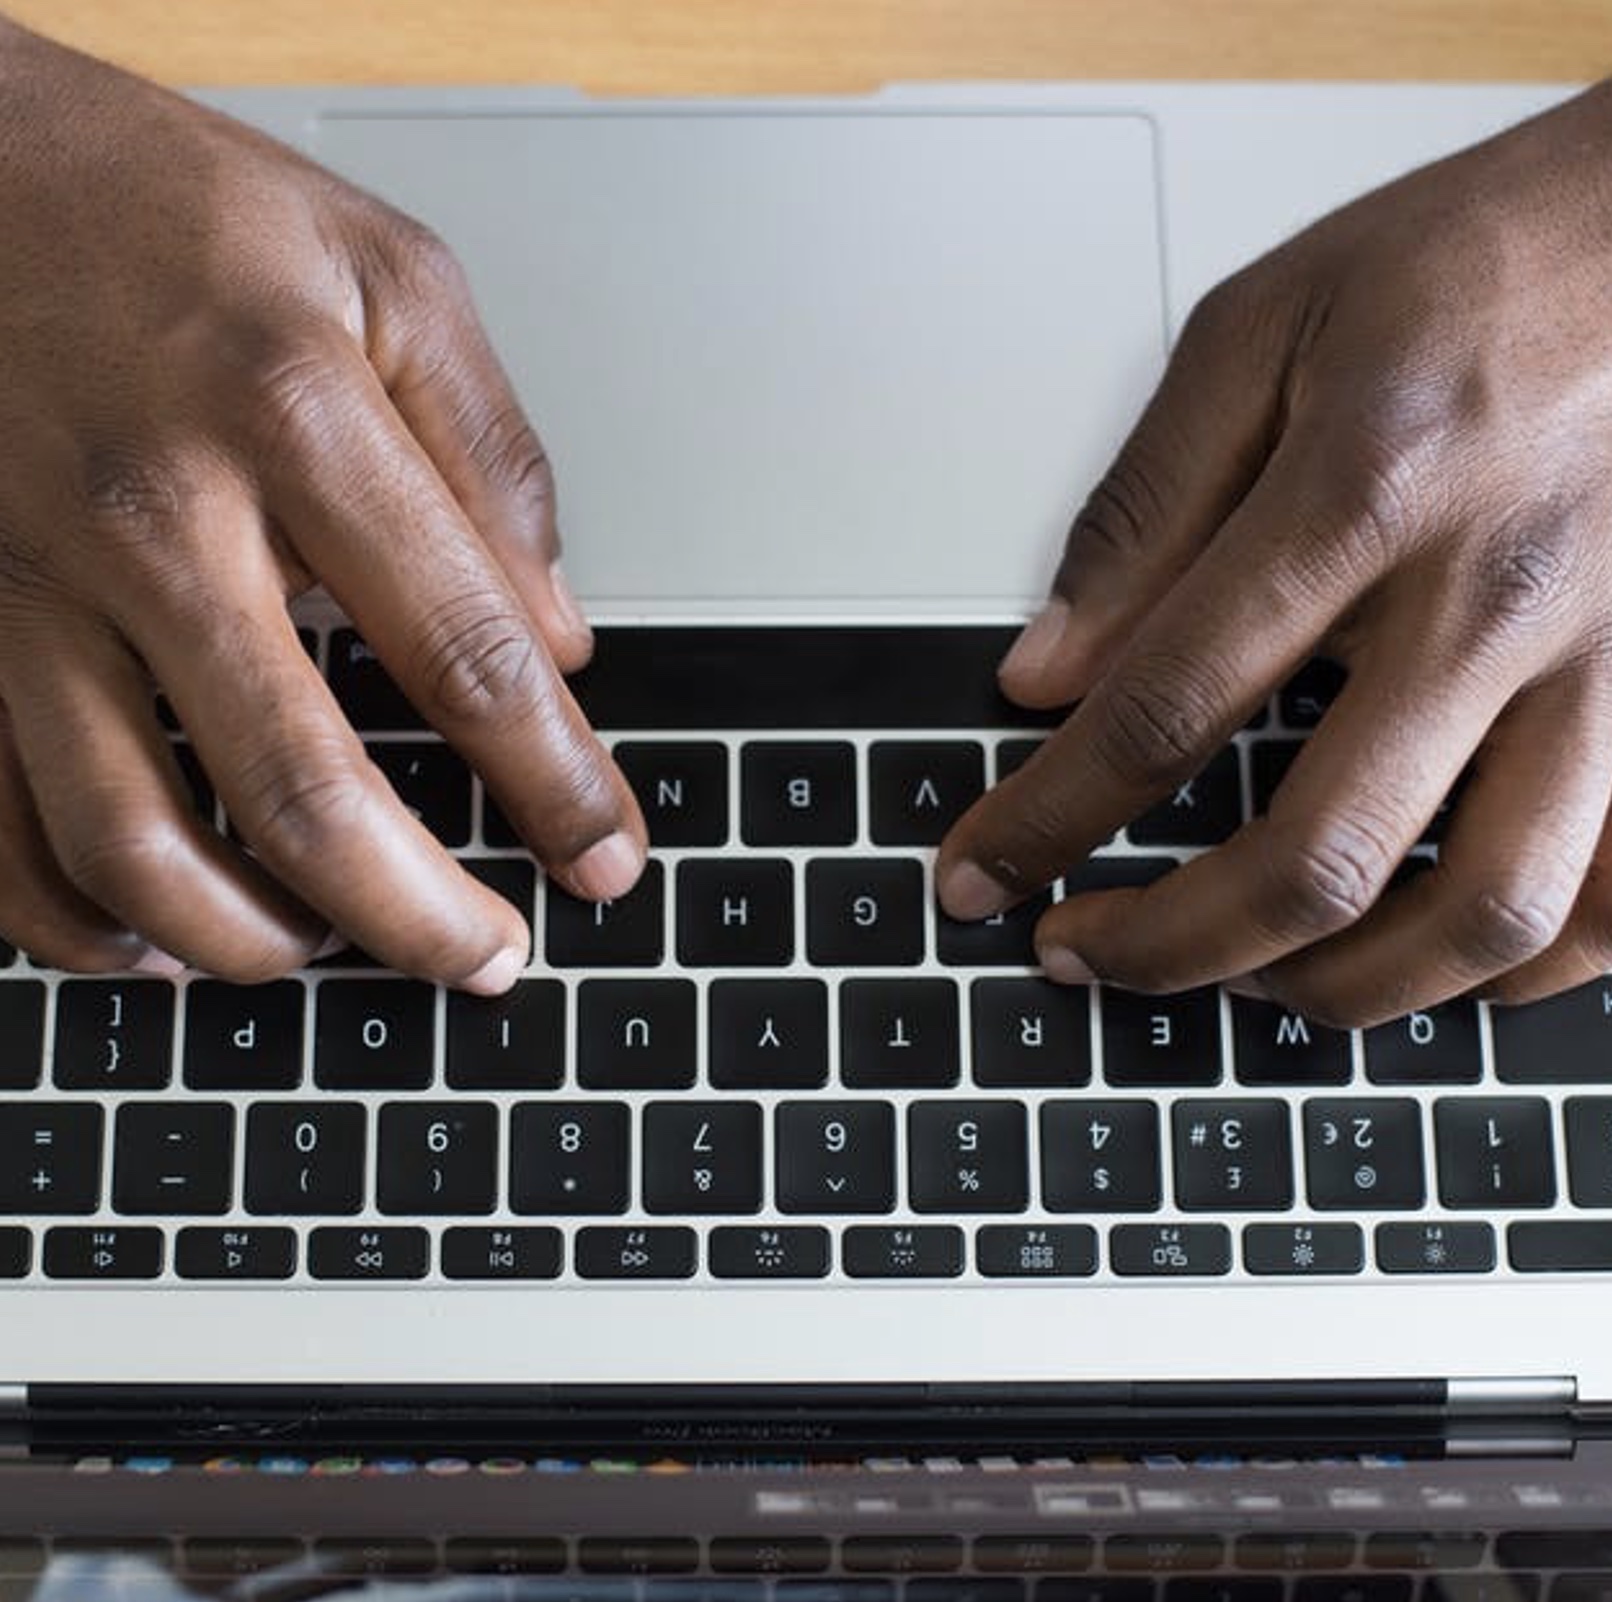 A person's hands typing on a MacBook Pro keyboard